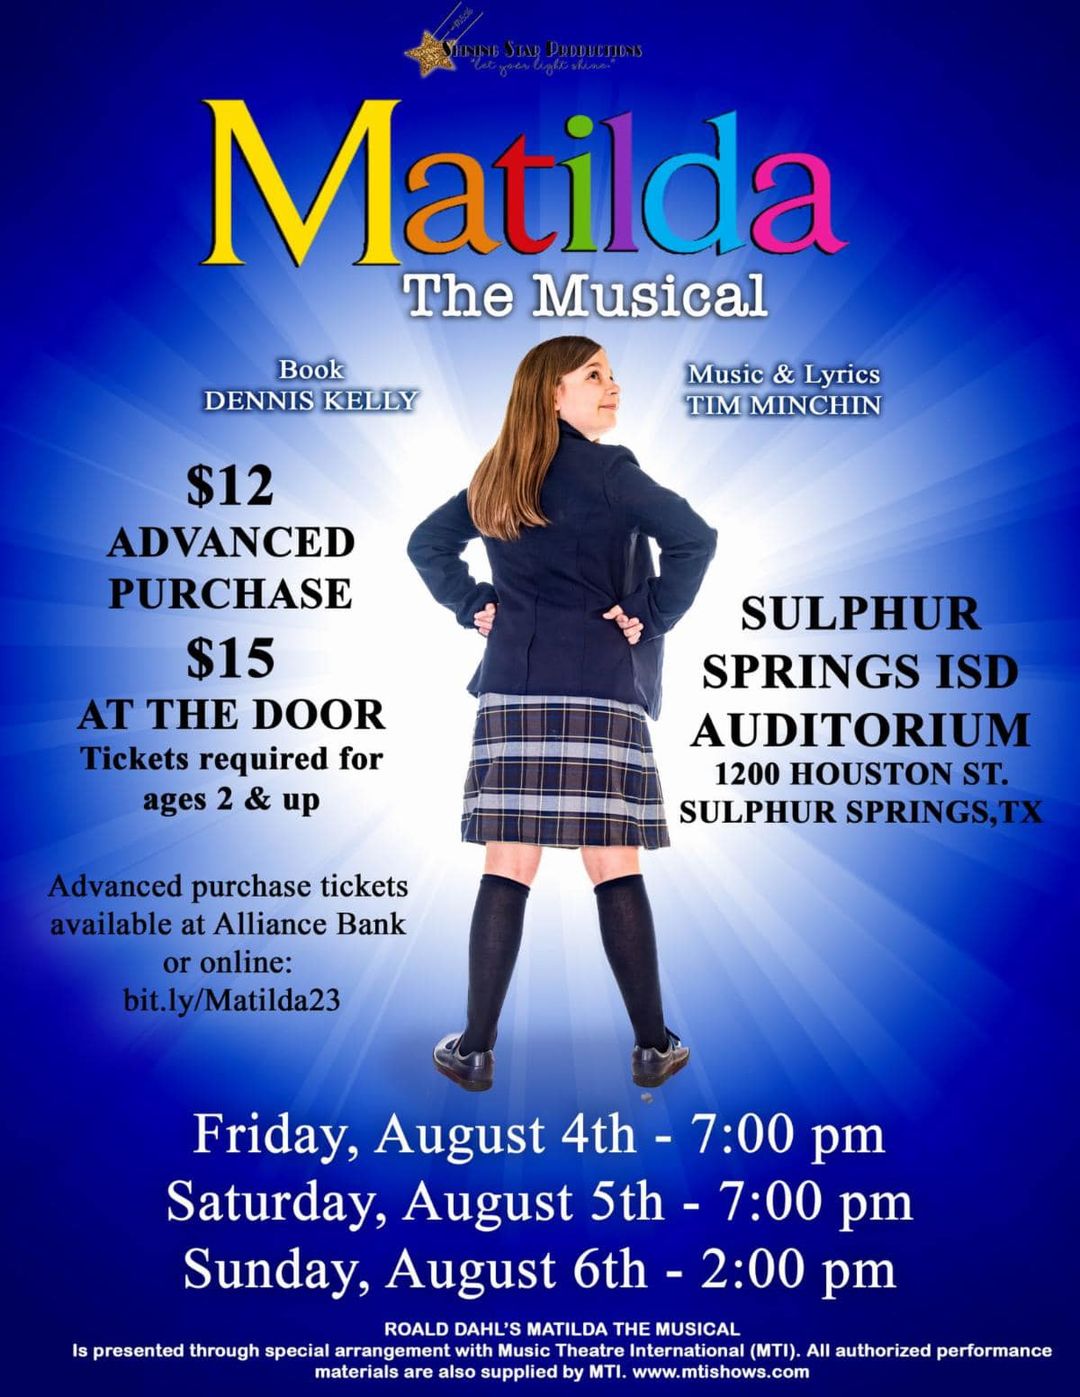 Join Shining Star Productions for Matilda the Musical